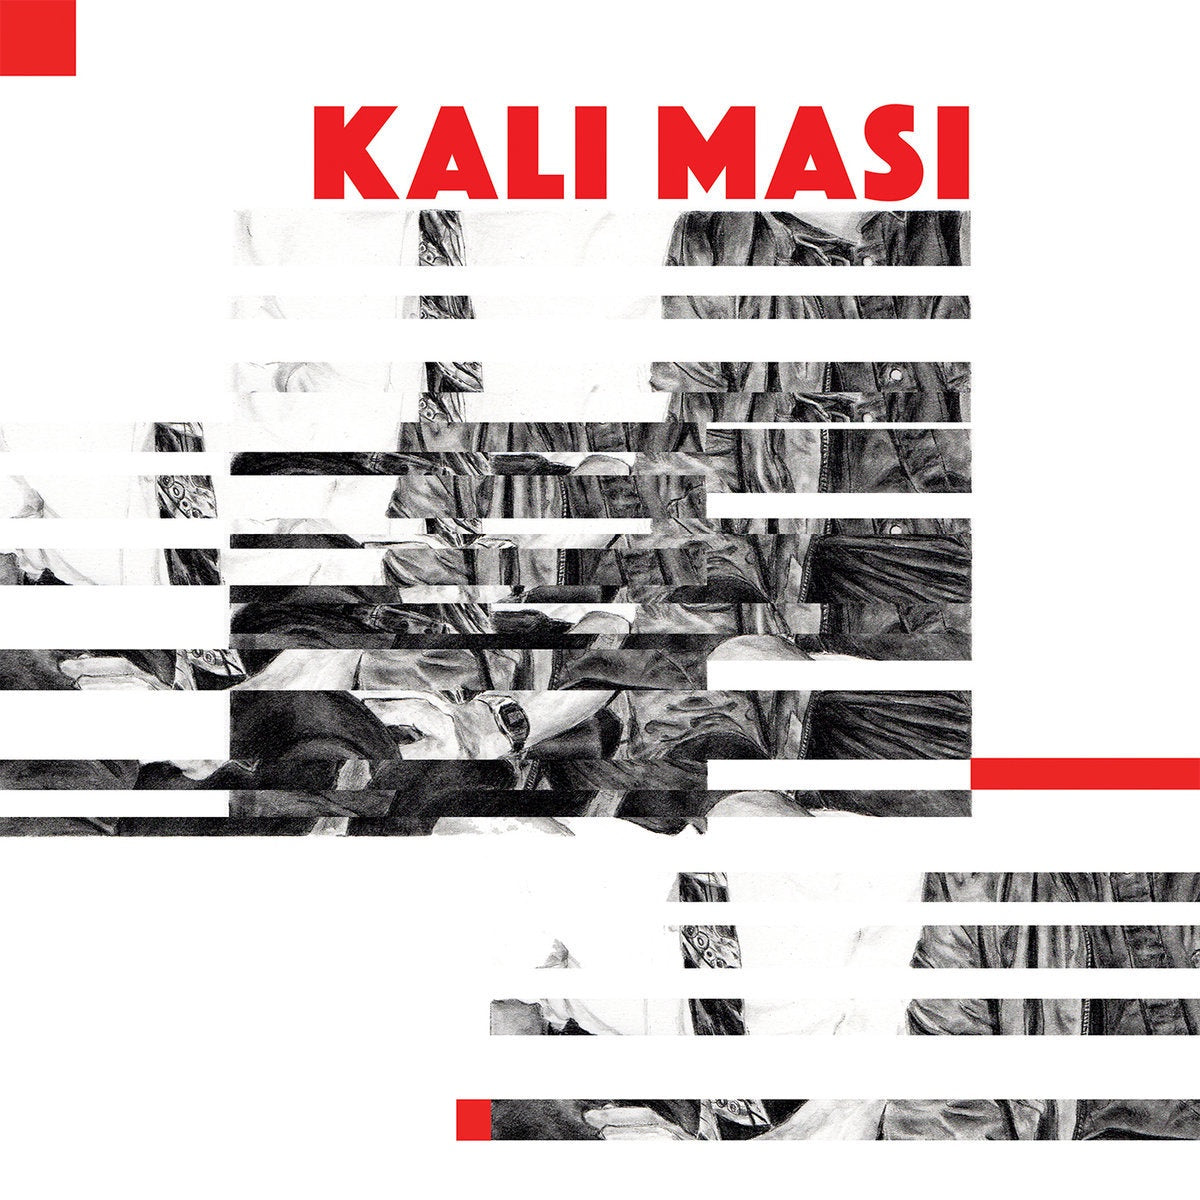 Kali Masi - Wind Instrument - New Vinyl Record 2017 Take This to Heart Records LP - Chicago, IL Punk Rock / Indie Rock